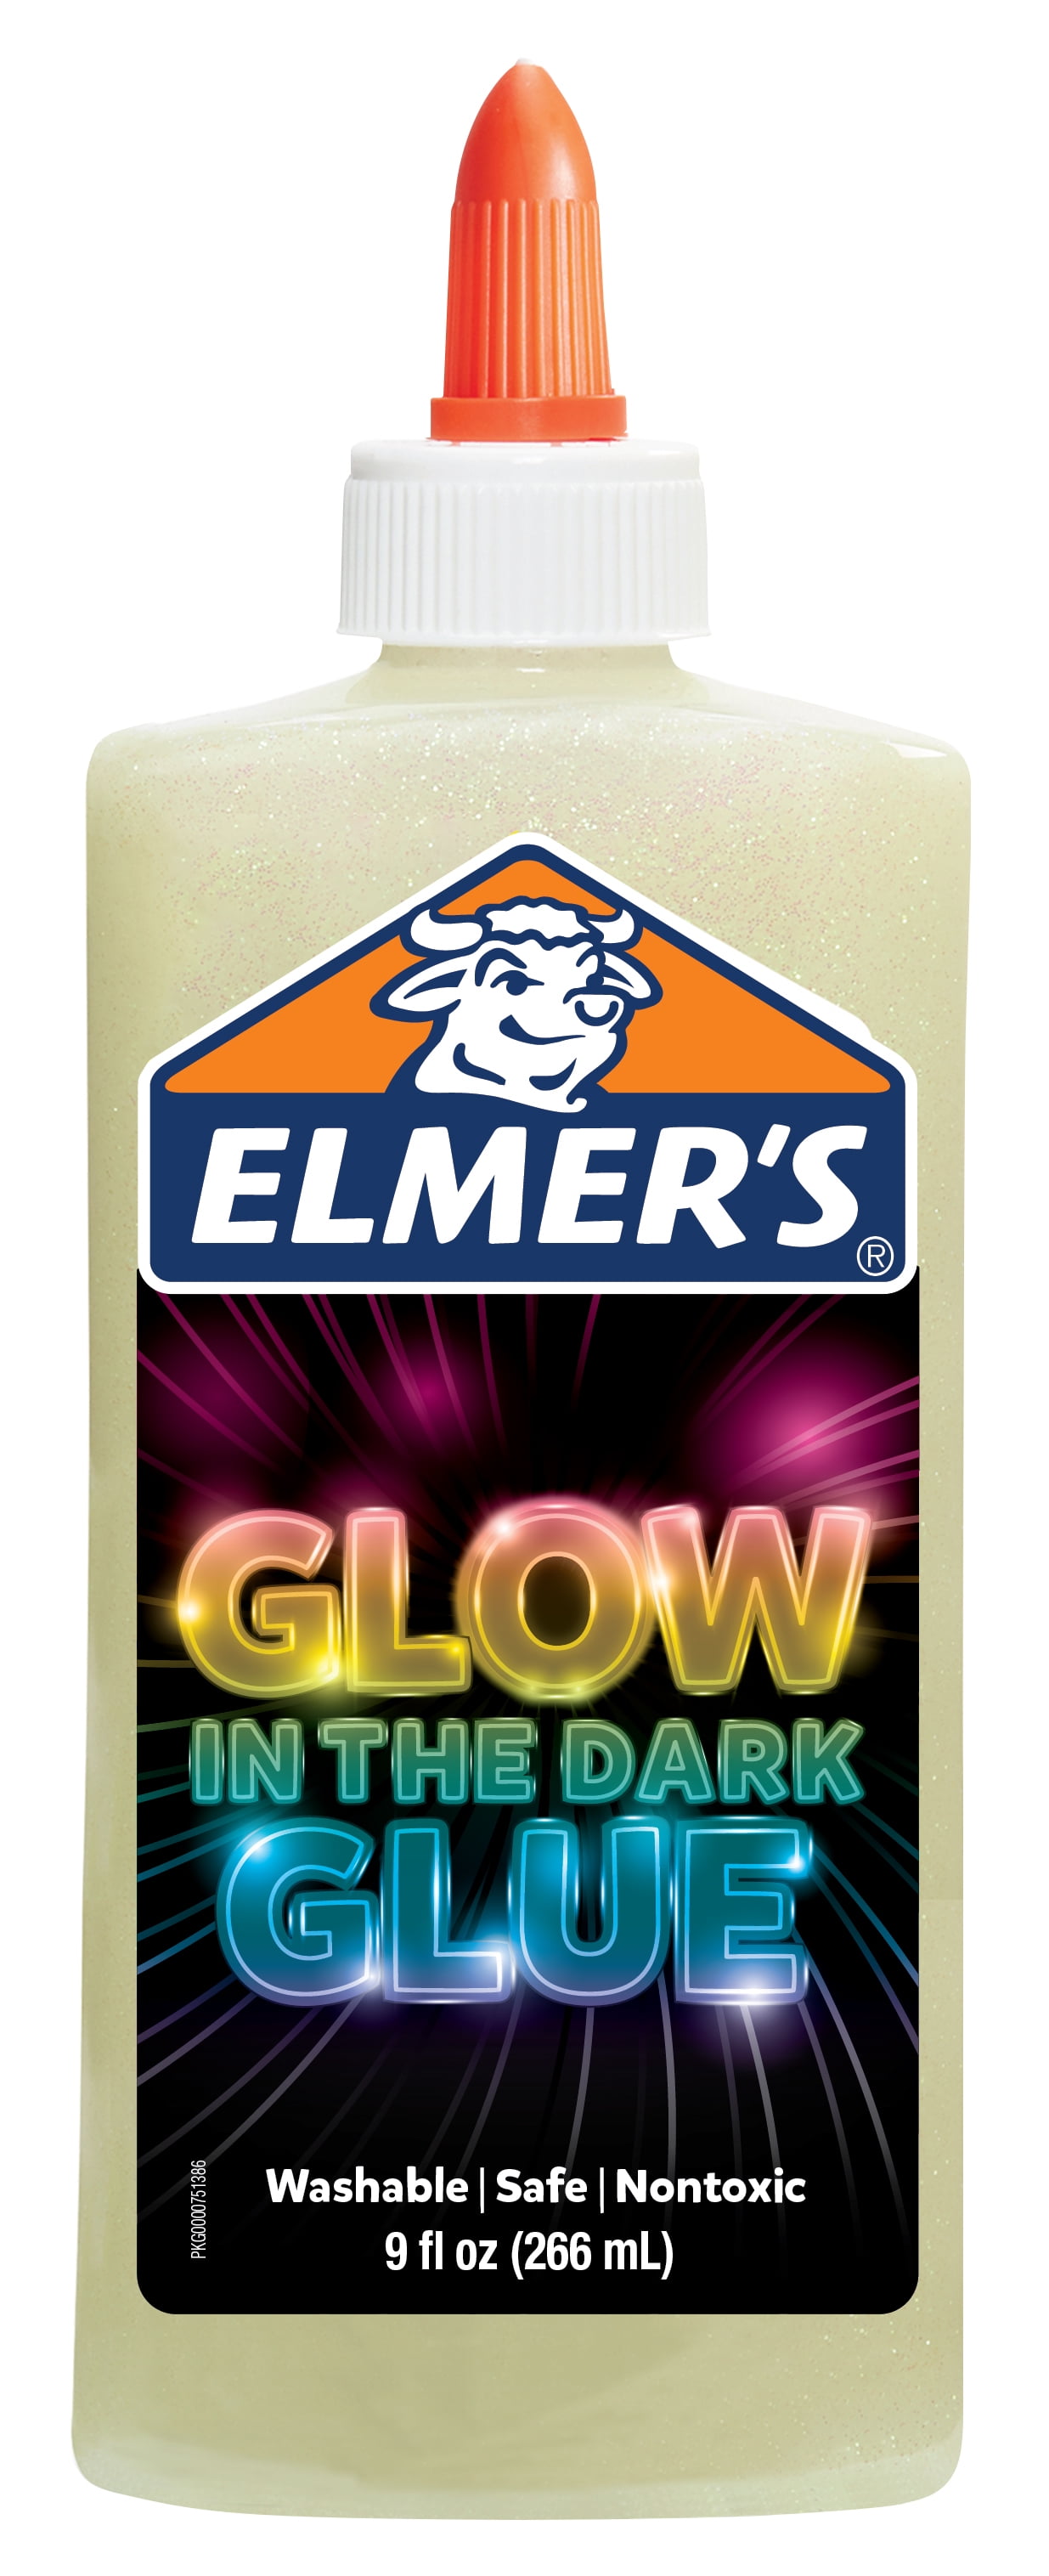 Elmer's - Glow them away and light up the night with our Glow in